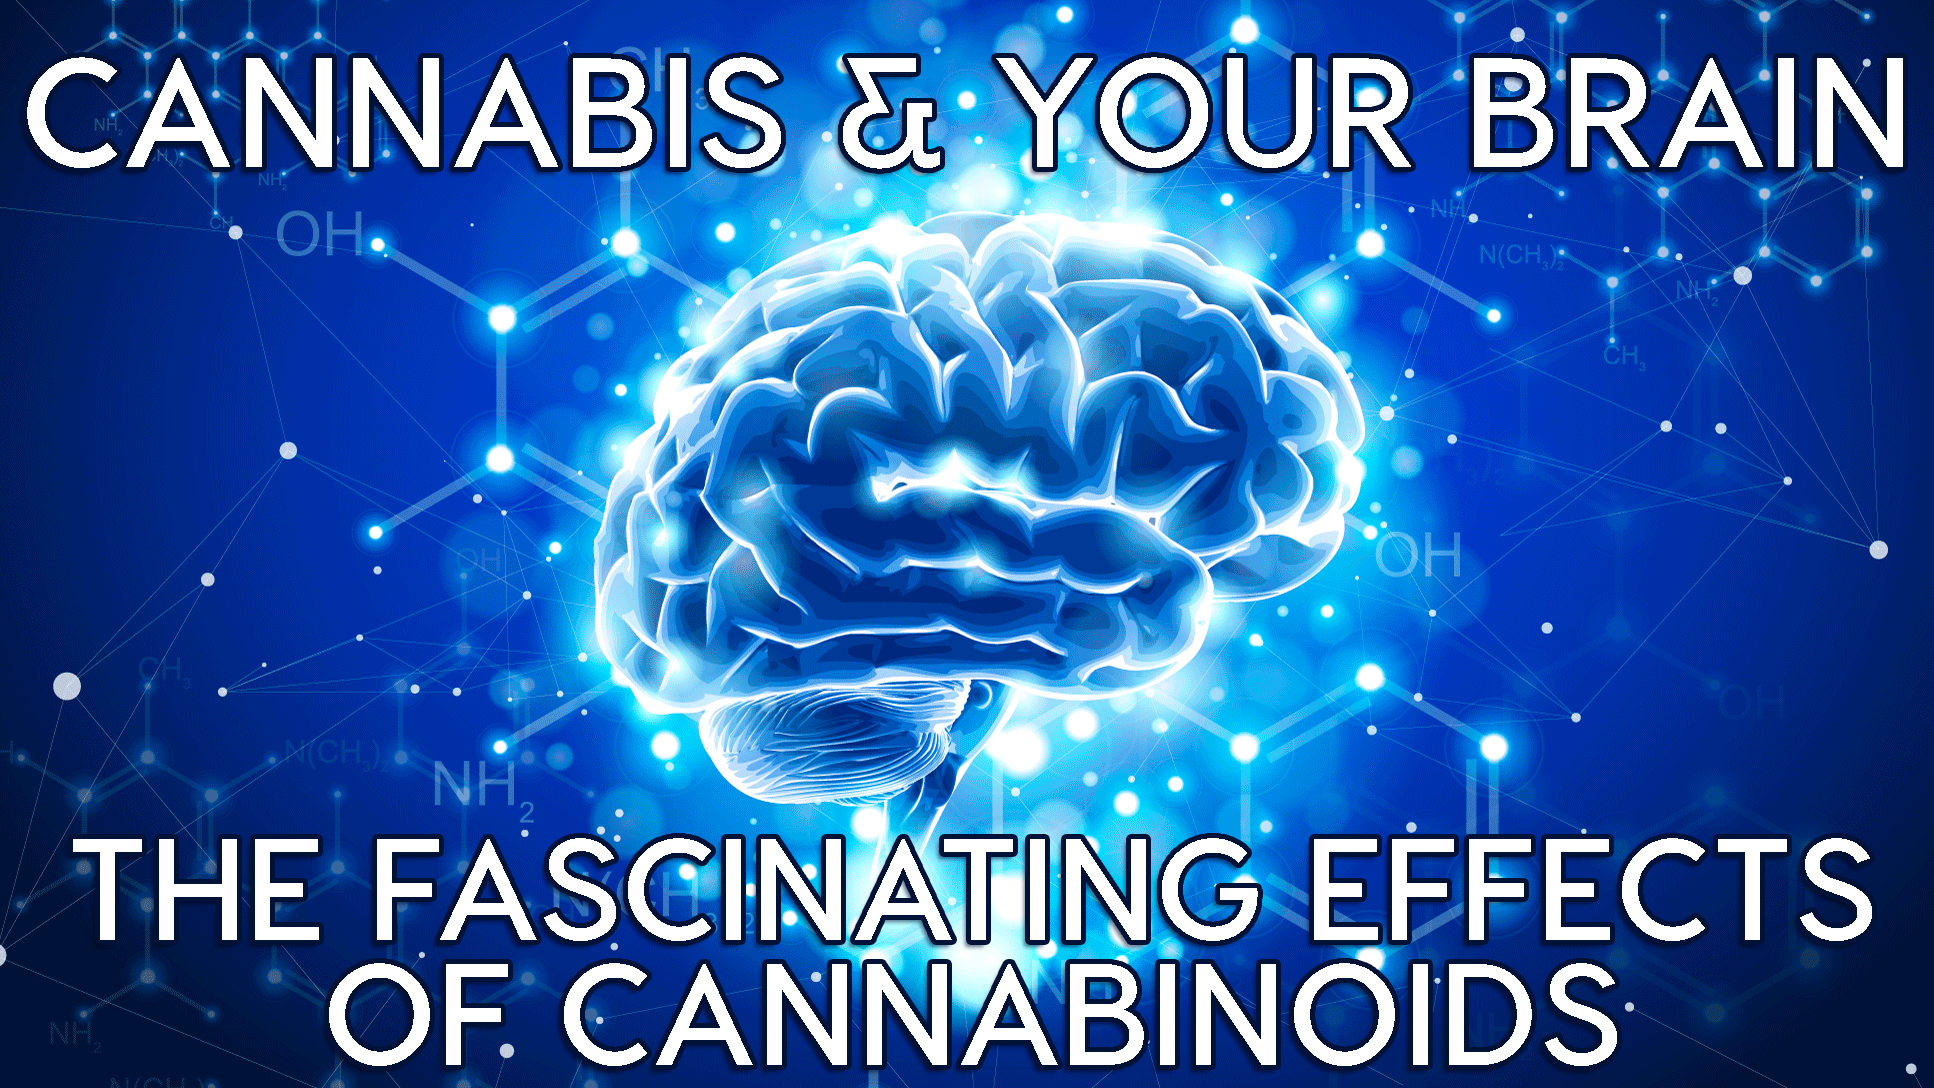 Cannabis & Your Brain: The Fascinating Effects of Cannabinoids